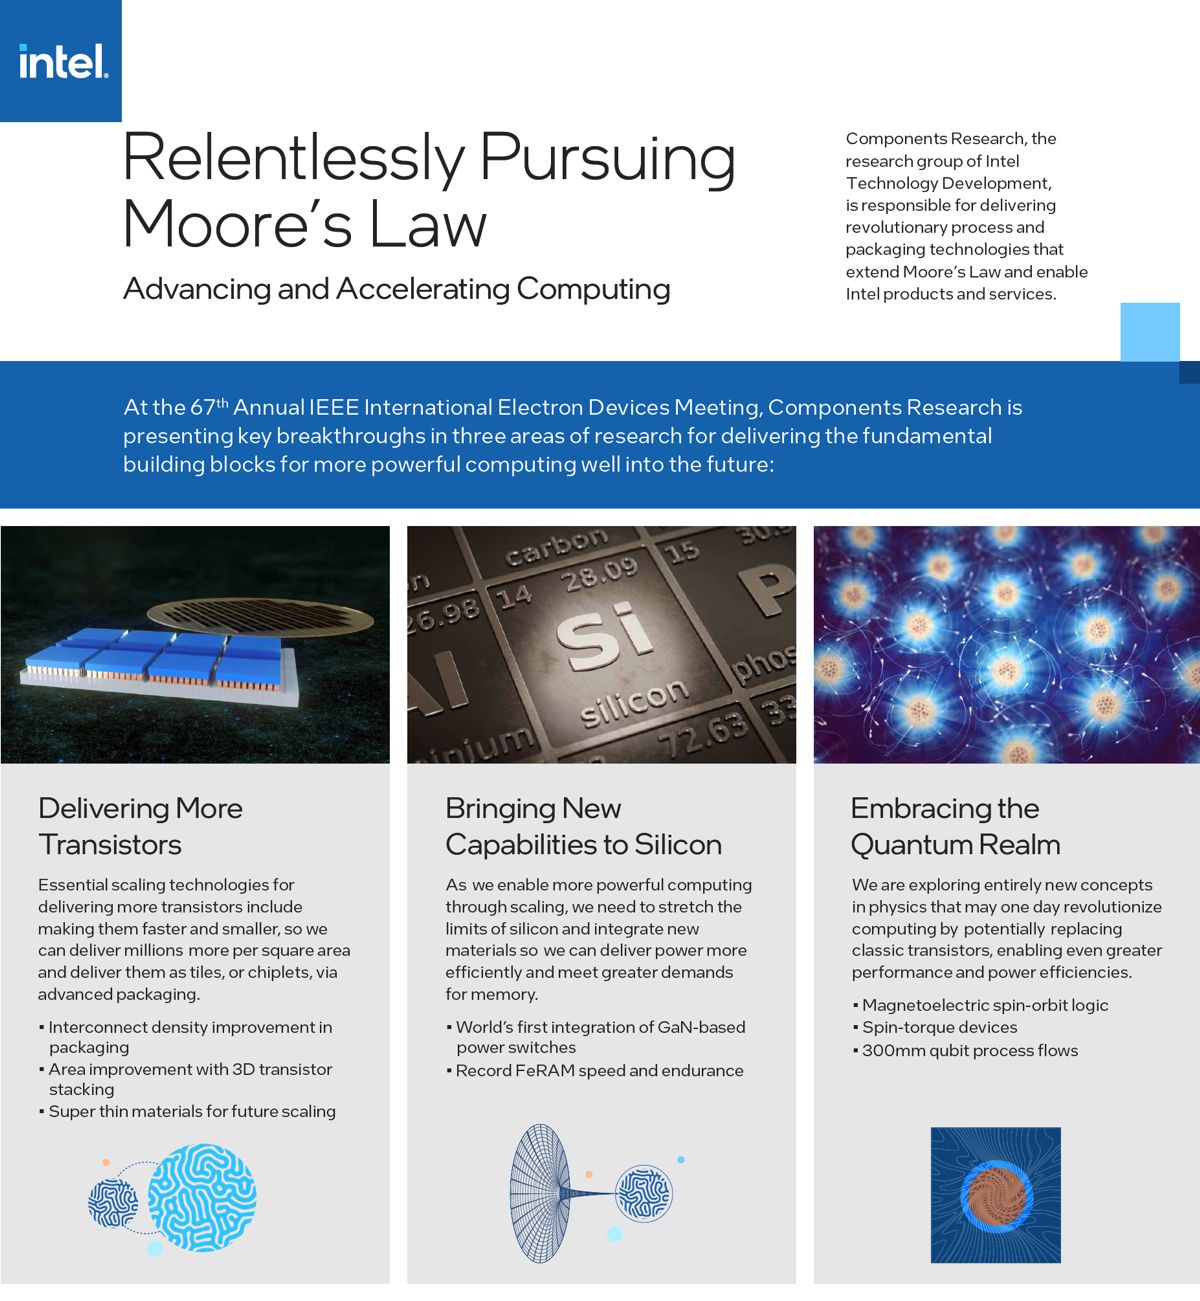 Intel research will extend Moore's Law beyond 2025